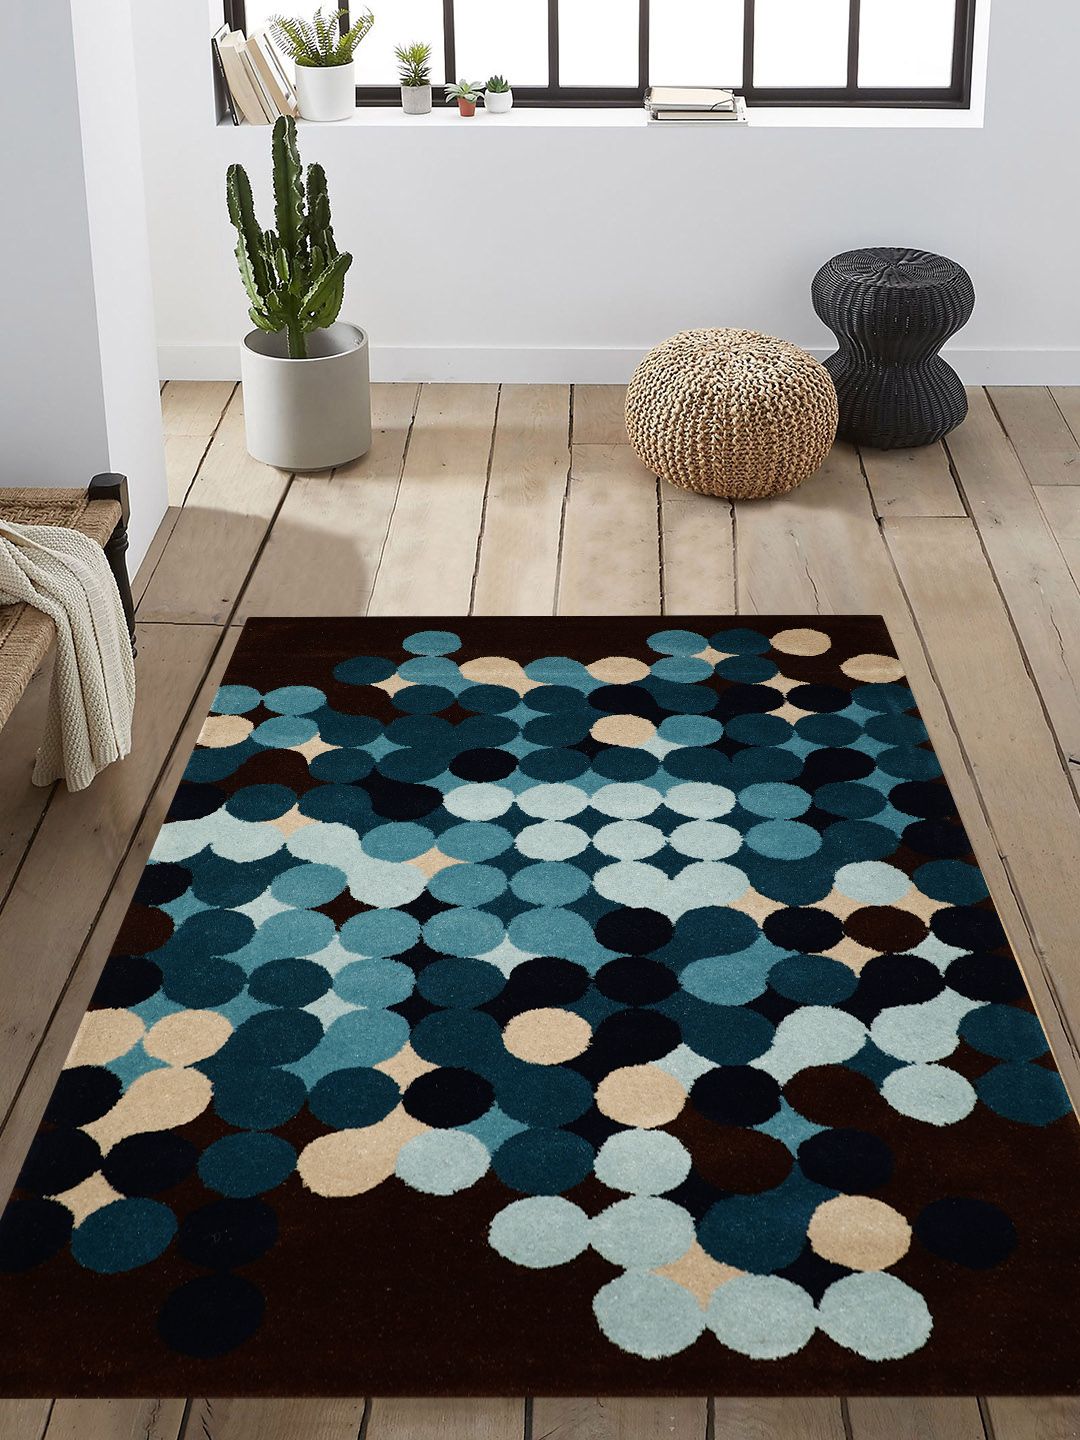 PRESTO Blue & Brown Geometric Patterned Hand-Tufted Anti-Skid Woolen Carpet Price in India